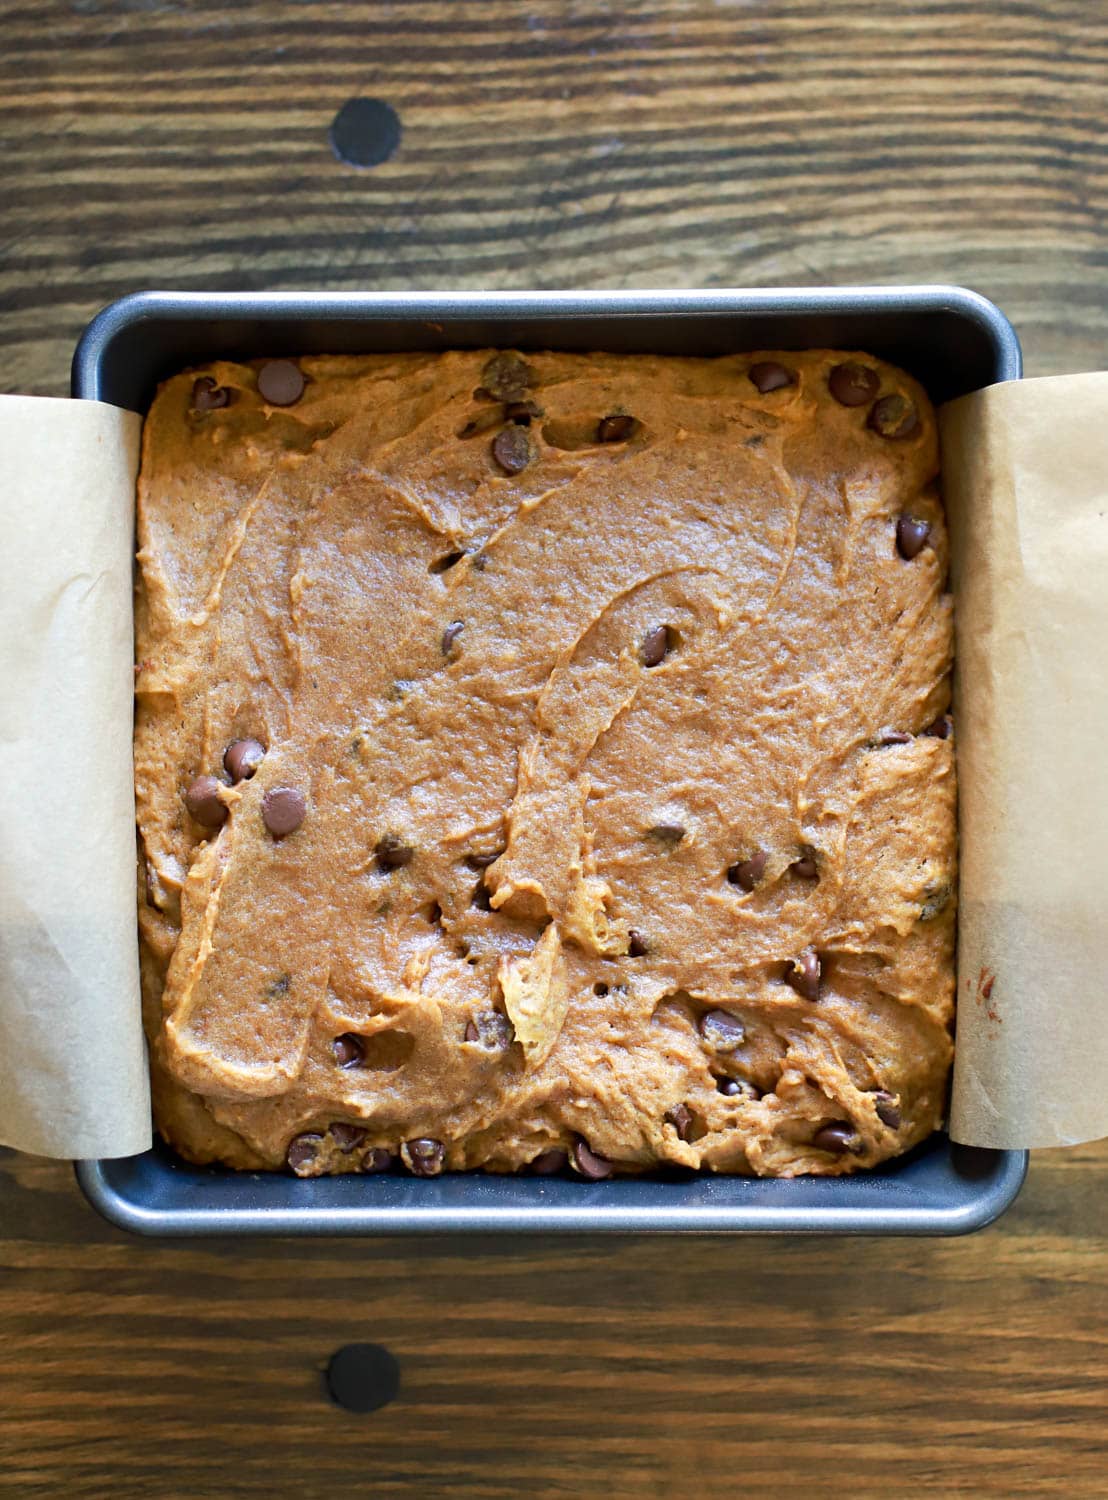 pan of uncut blondies with chocolate chips.